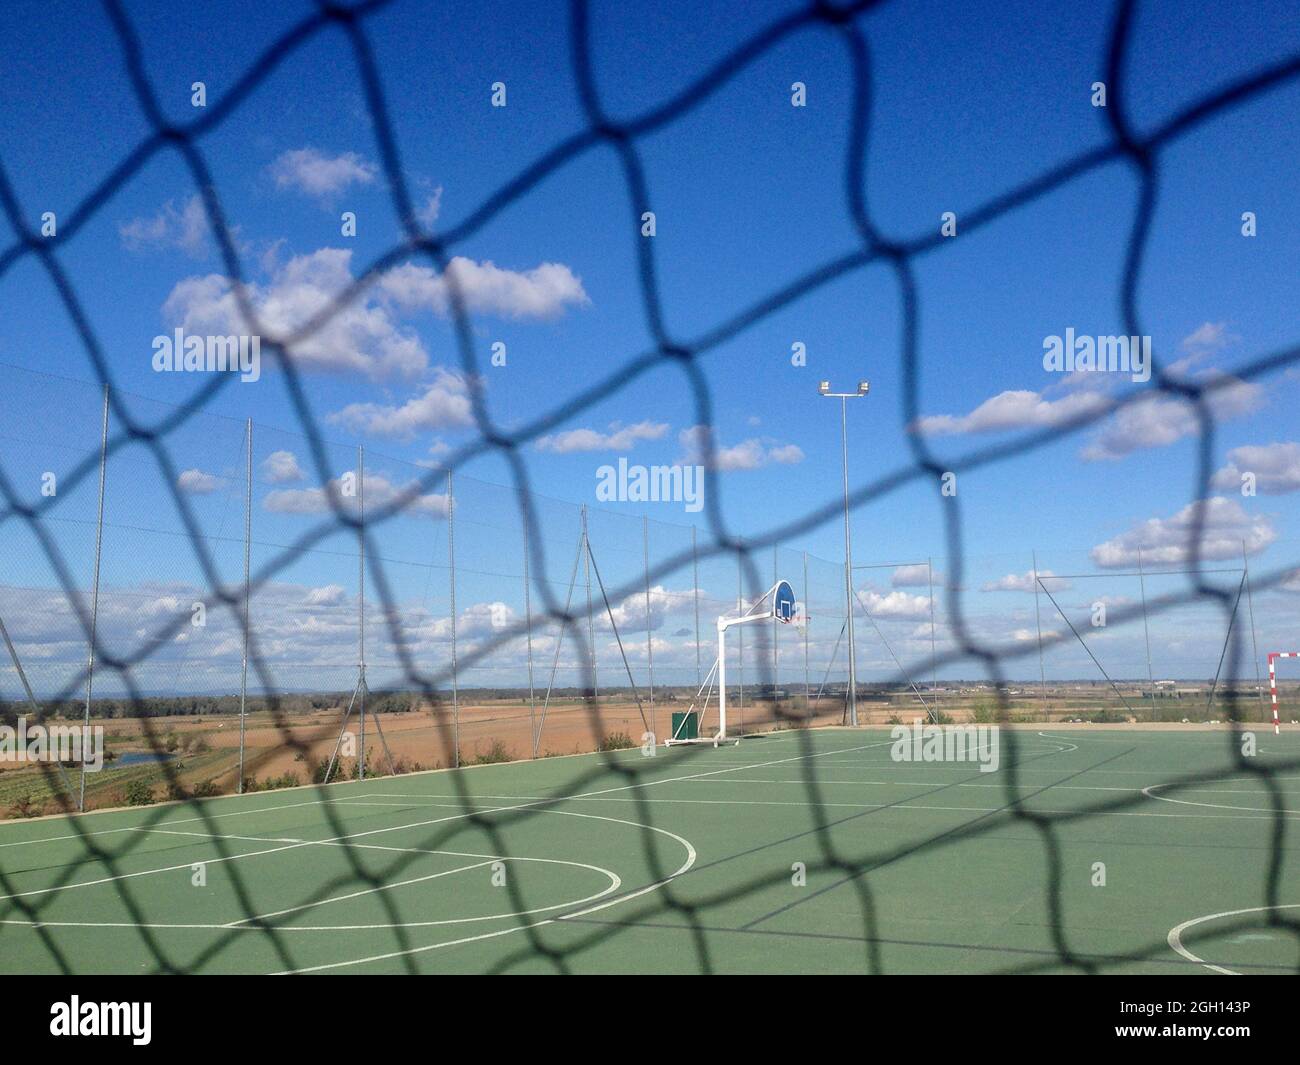 Urban multisports court seen behind safety net. Blue cloudy sky. Stock Photo